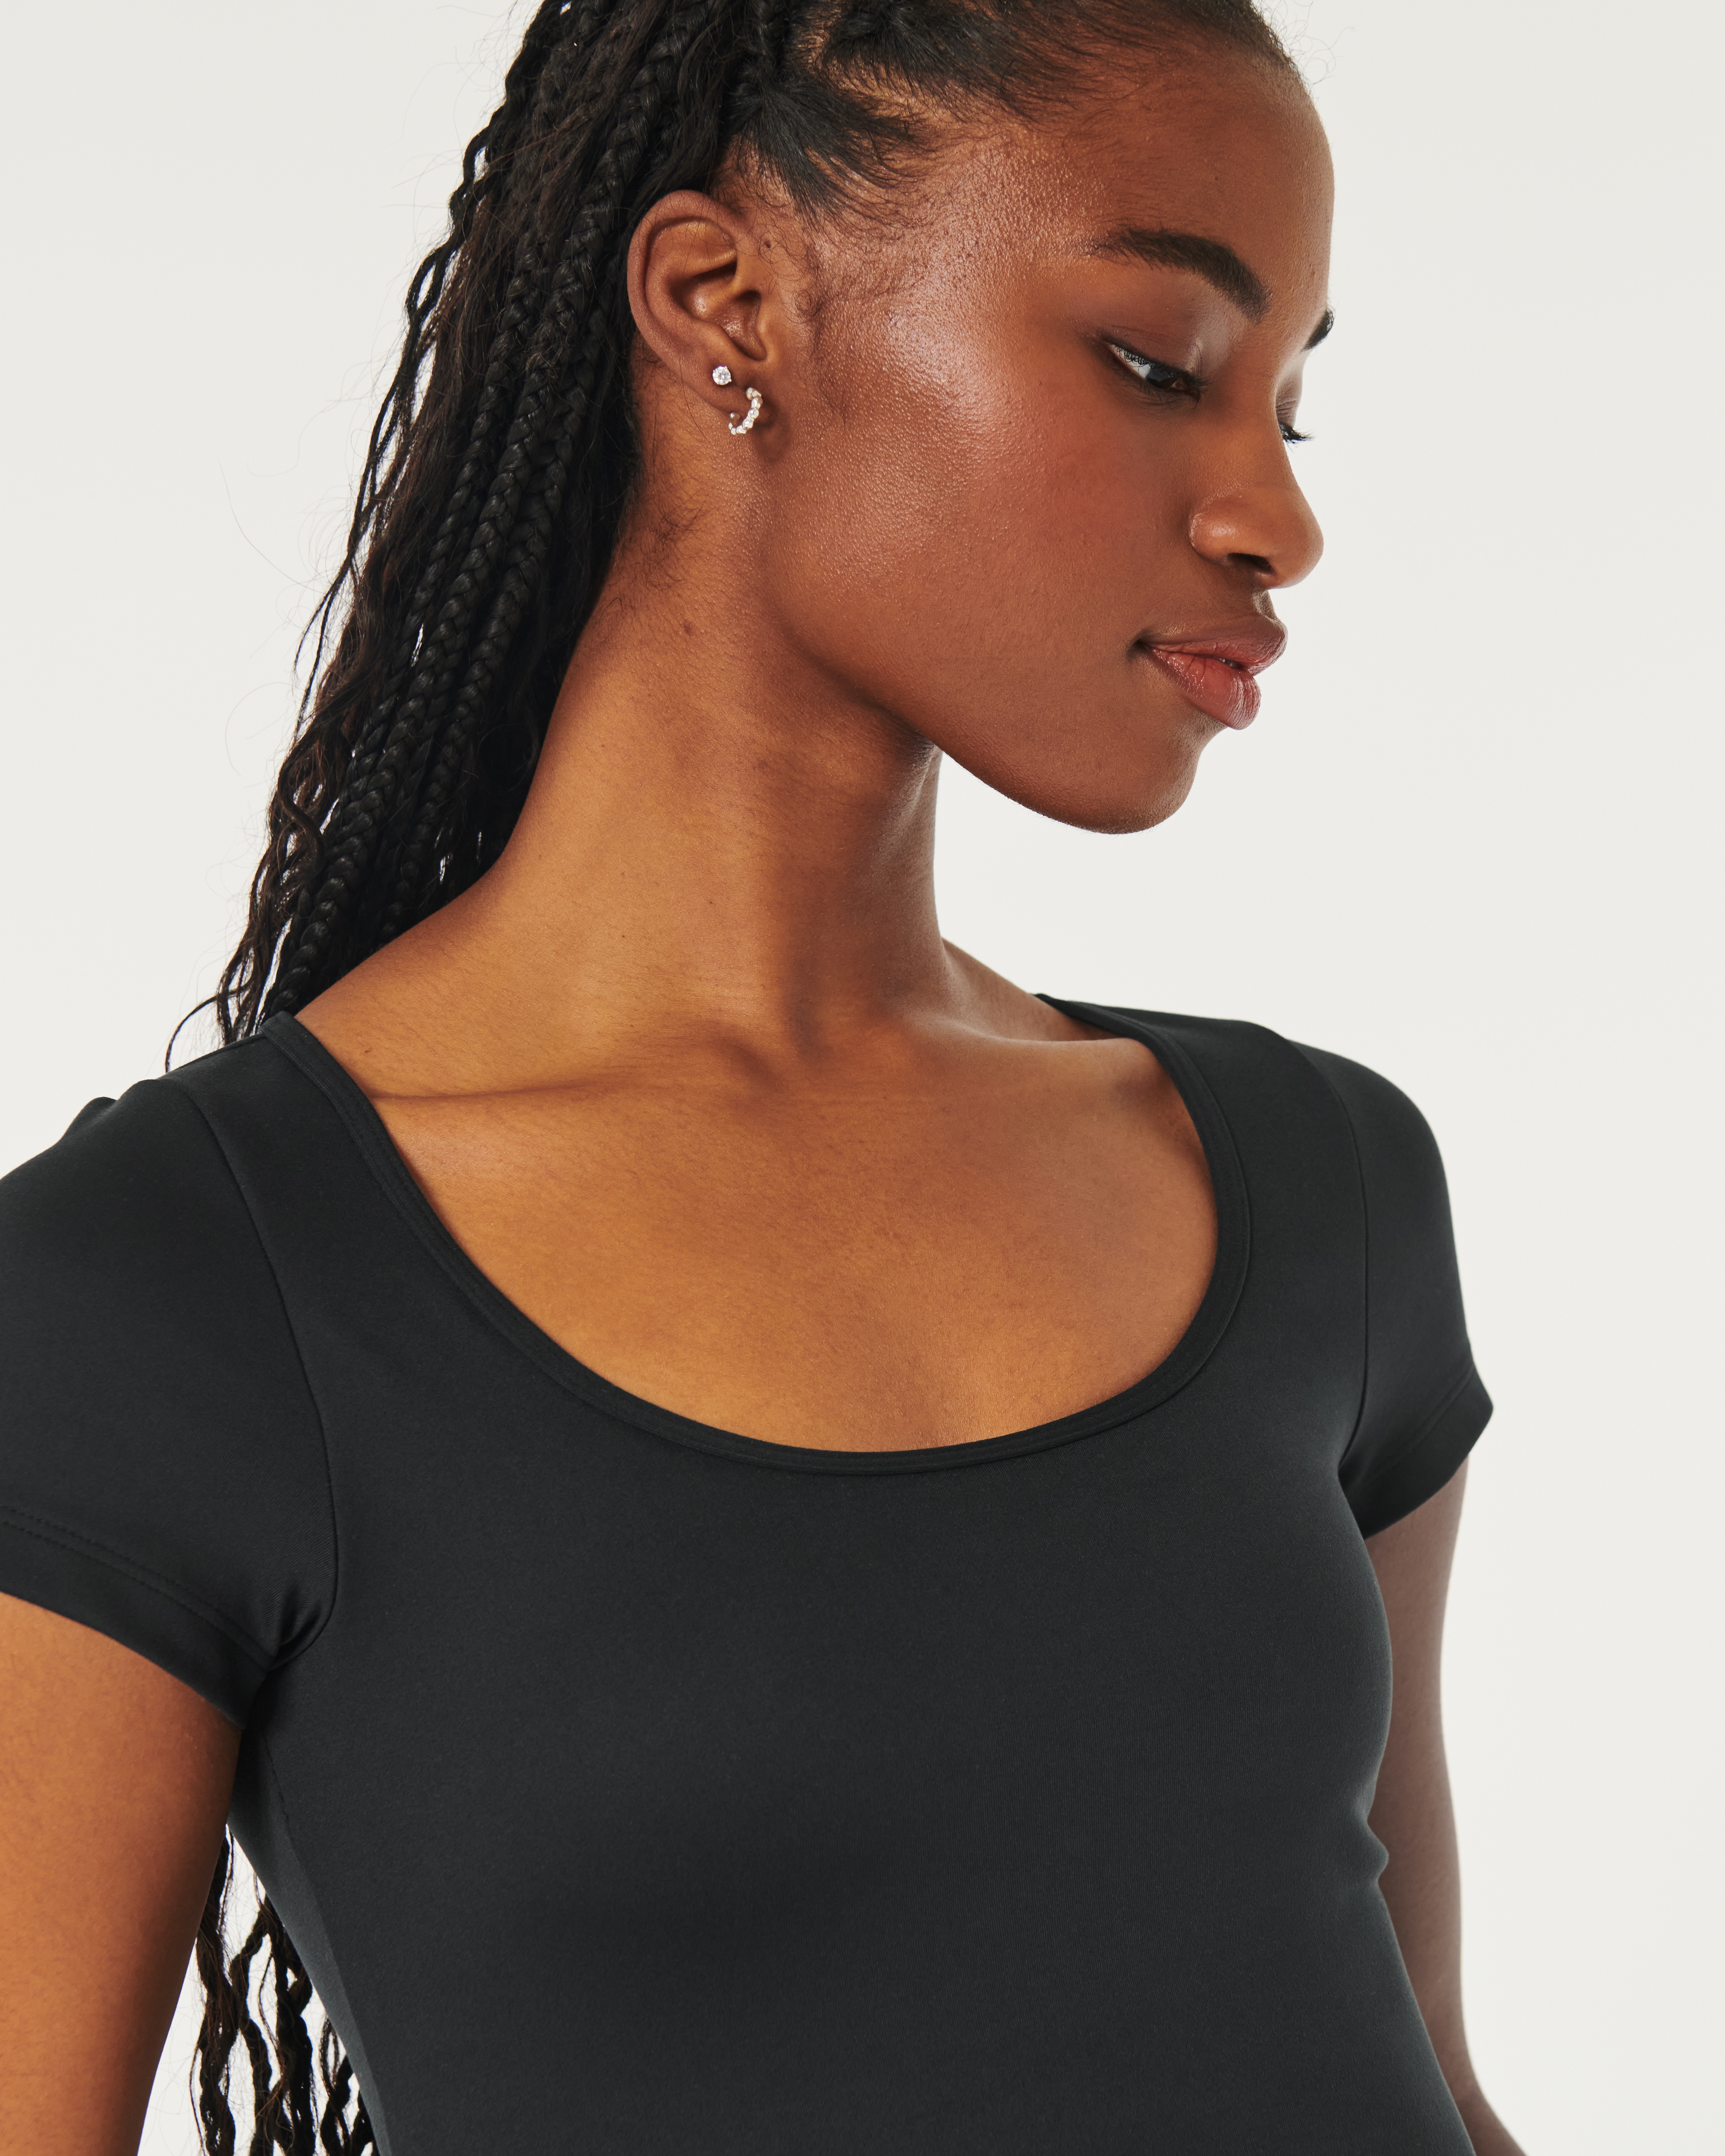 Gilly Hicks Active Recharge Wide-Neck T-Shirt